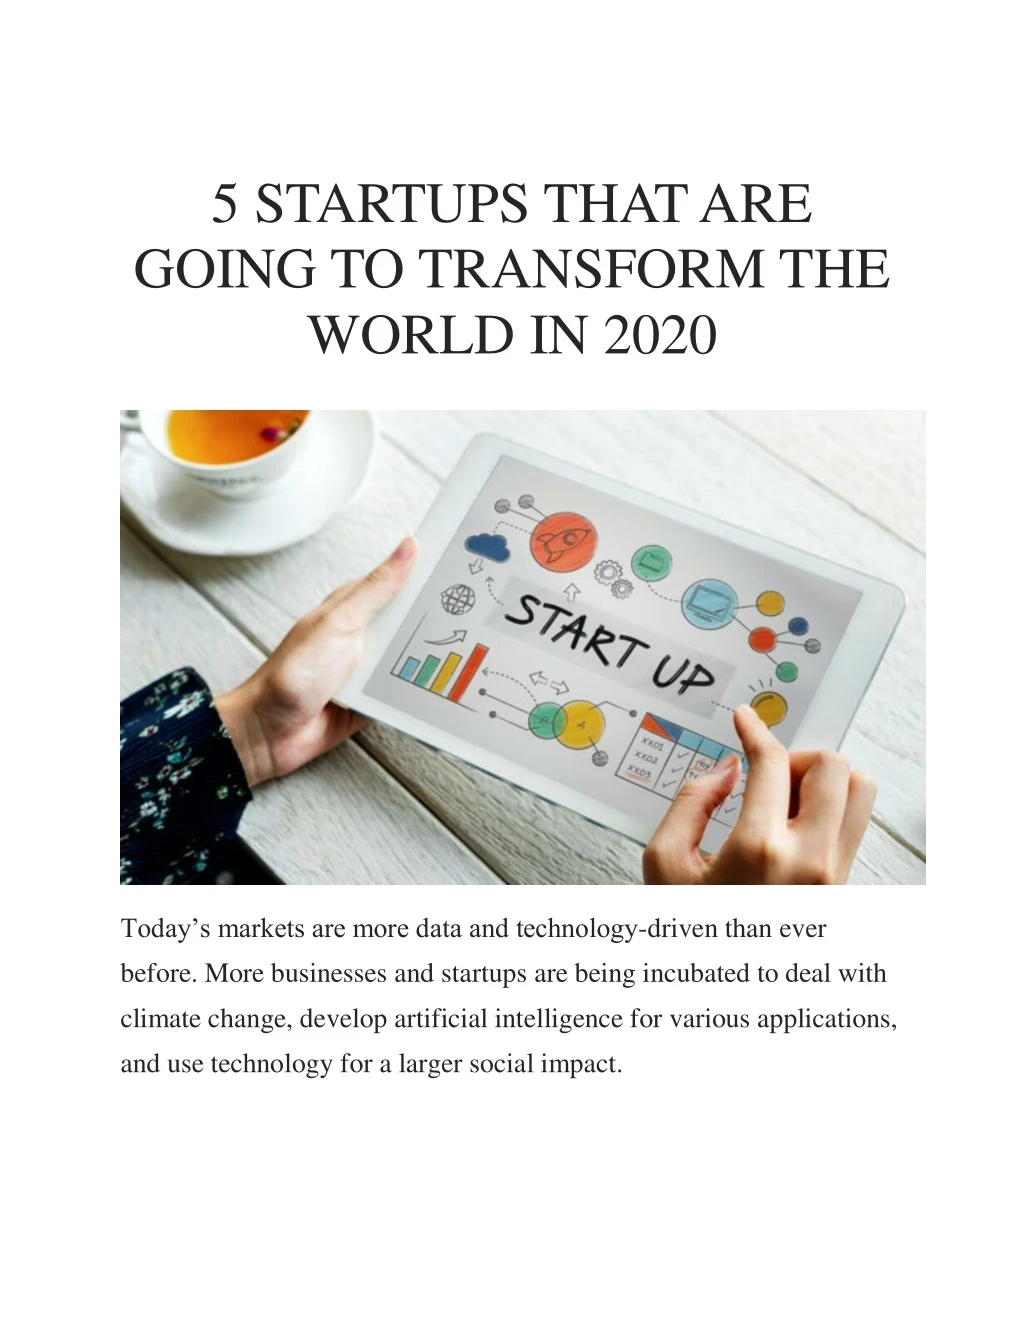 5 startups that are going to transform the world